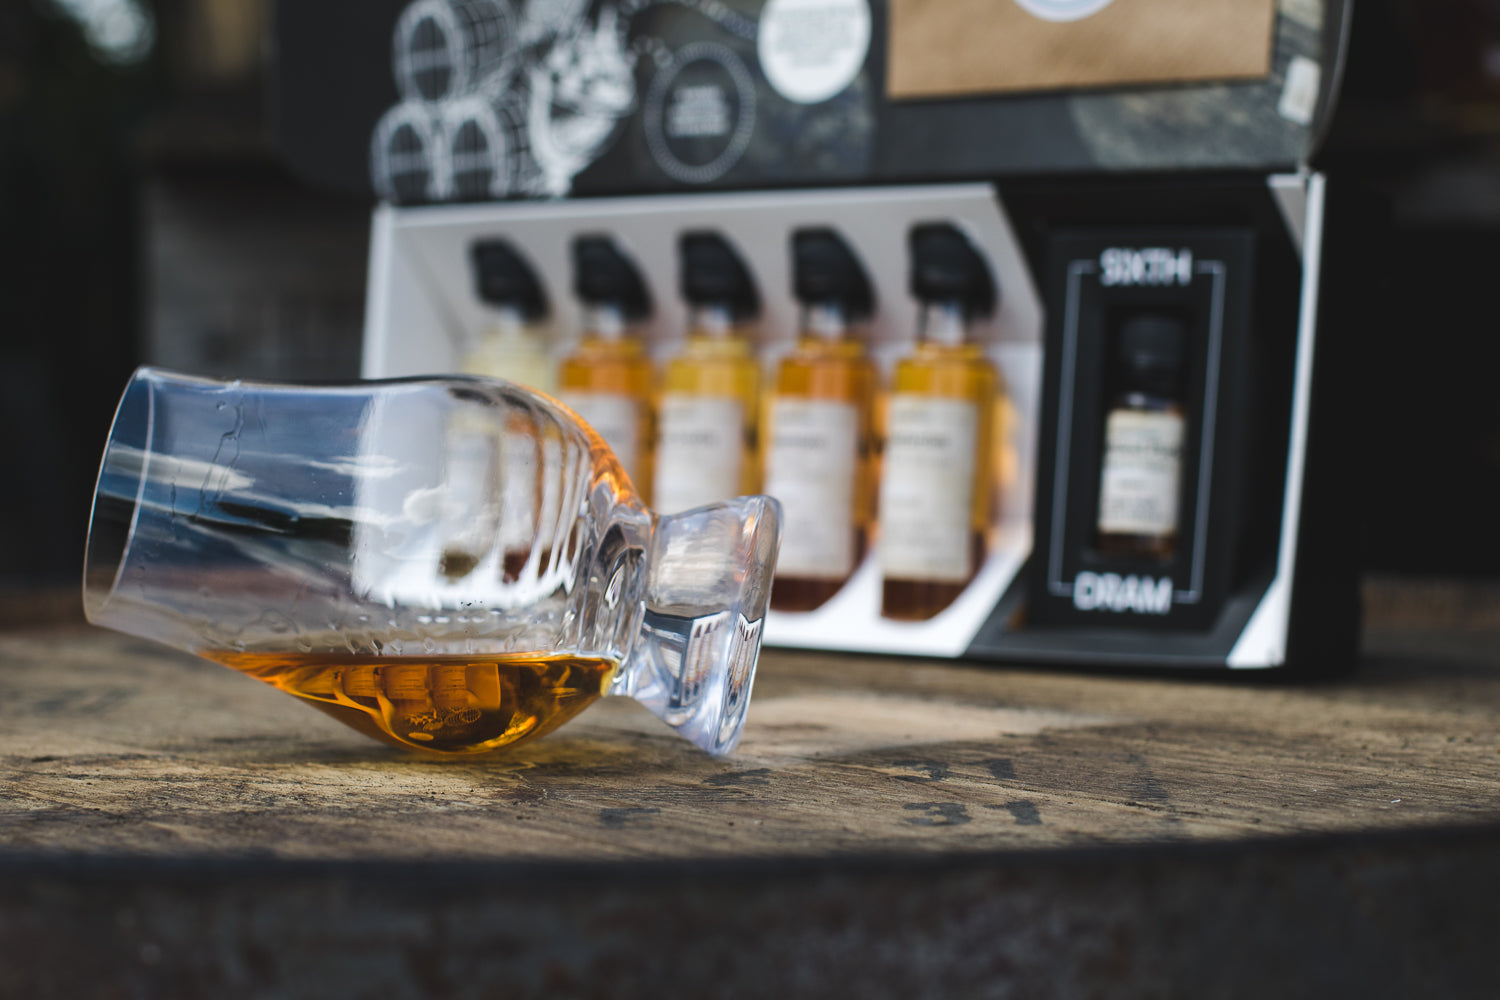 The Dram Team: Out of the ordinary whisky tastings, delivered.